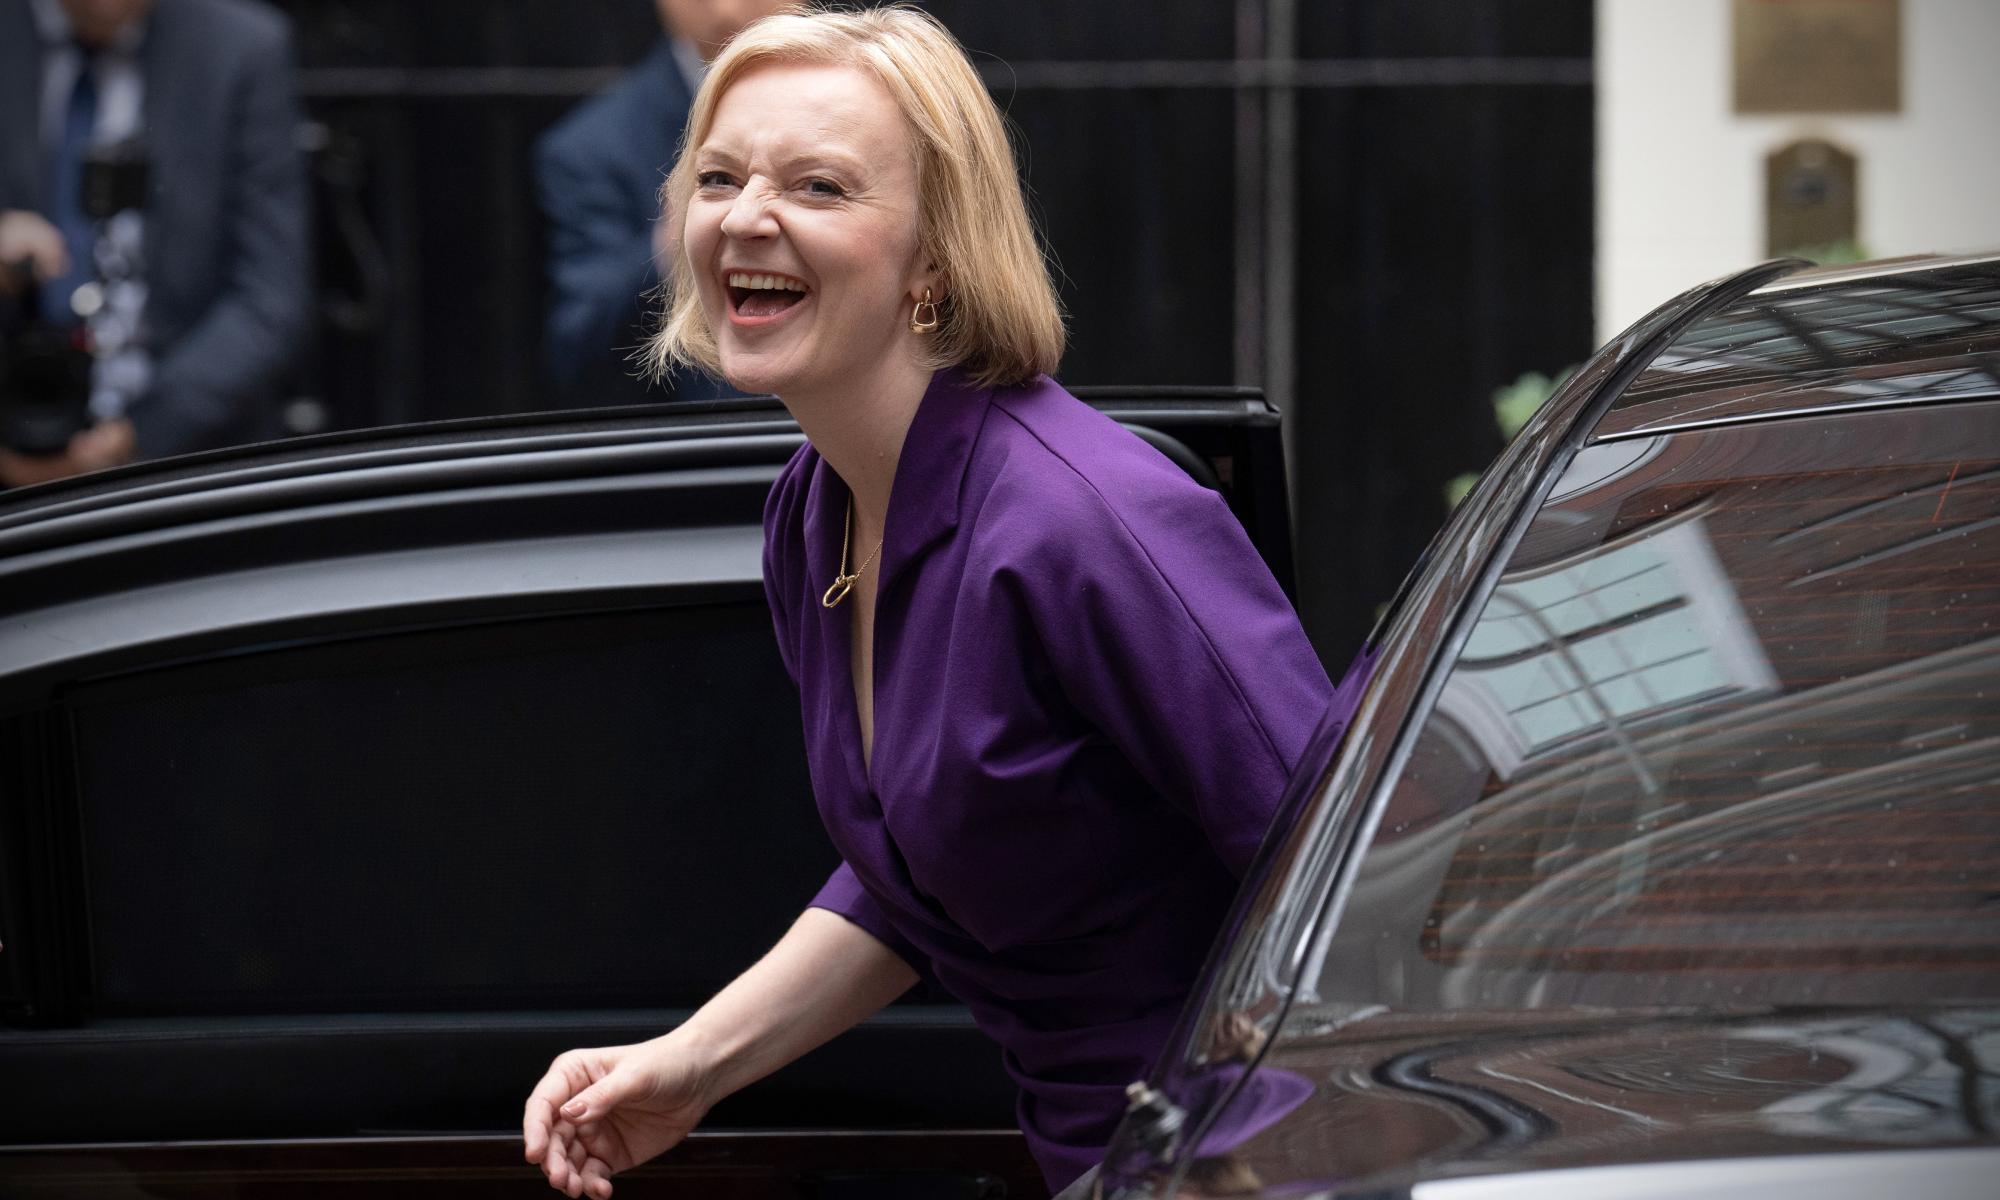 Gas drive will not solve energy crisis, climate advisers tell Liz Truss